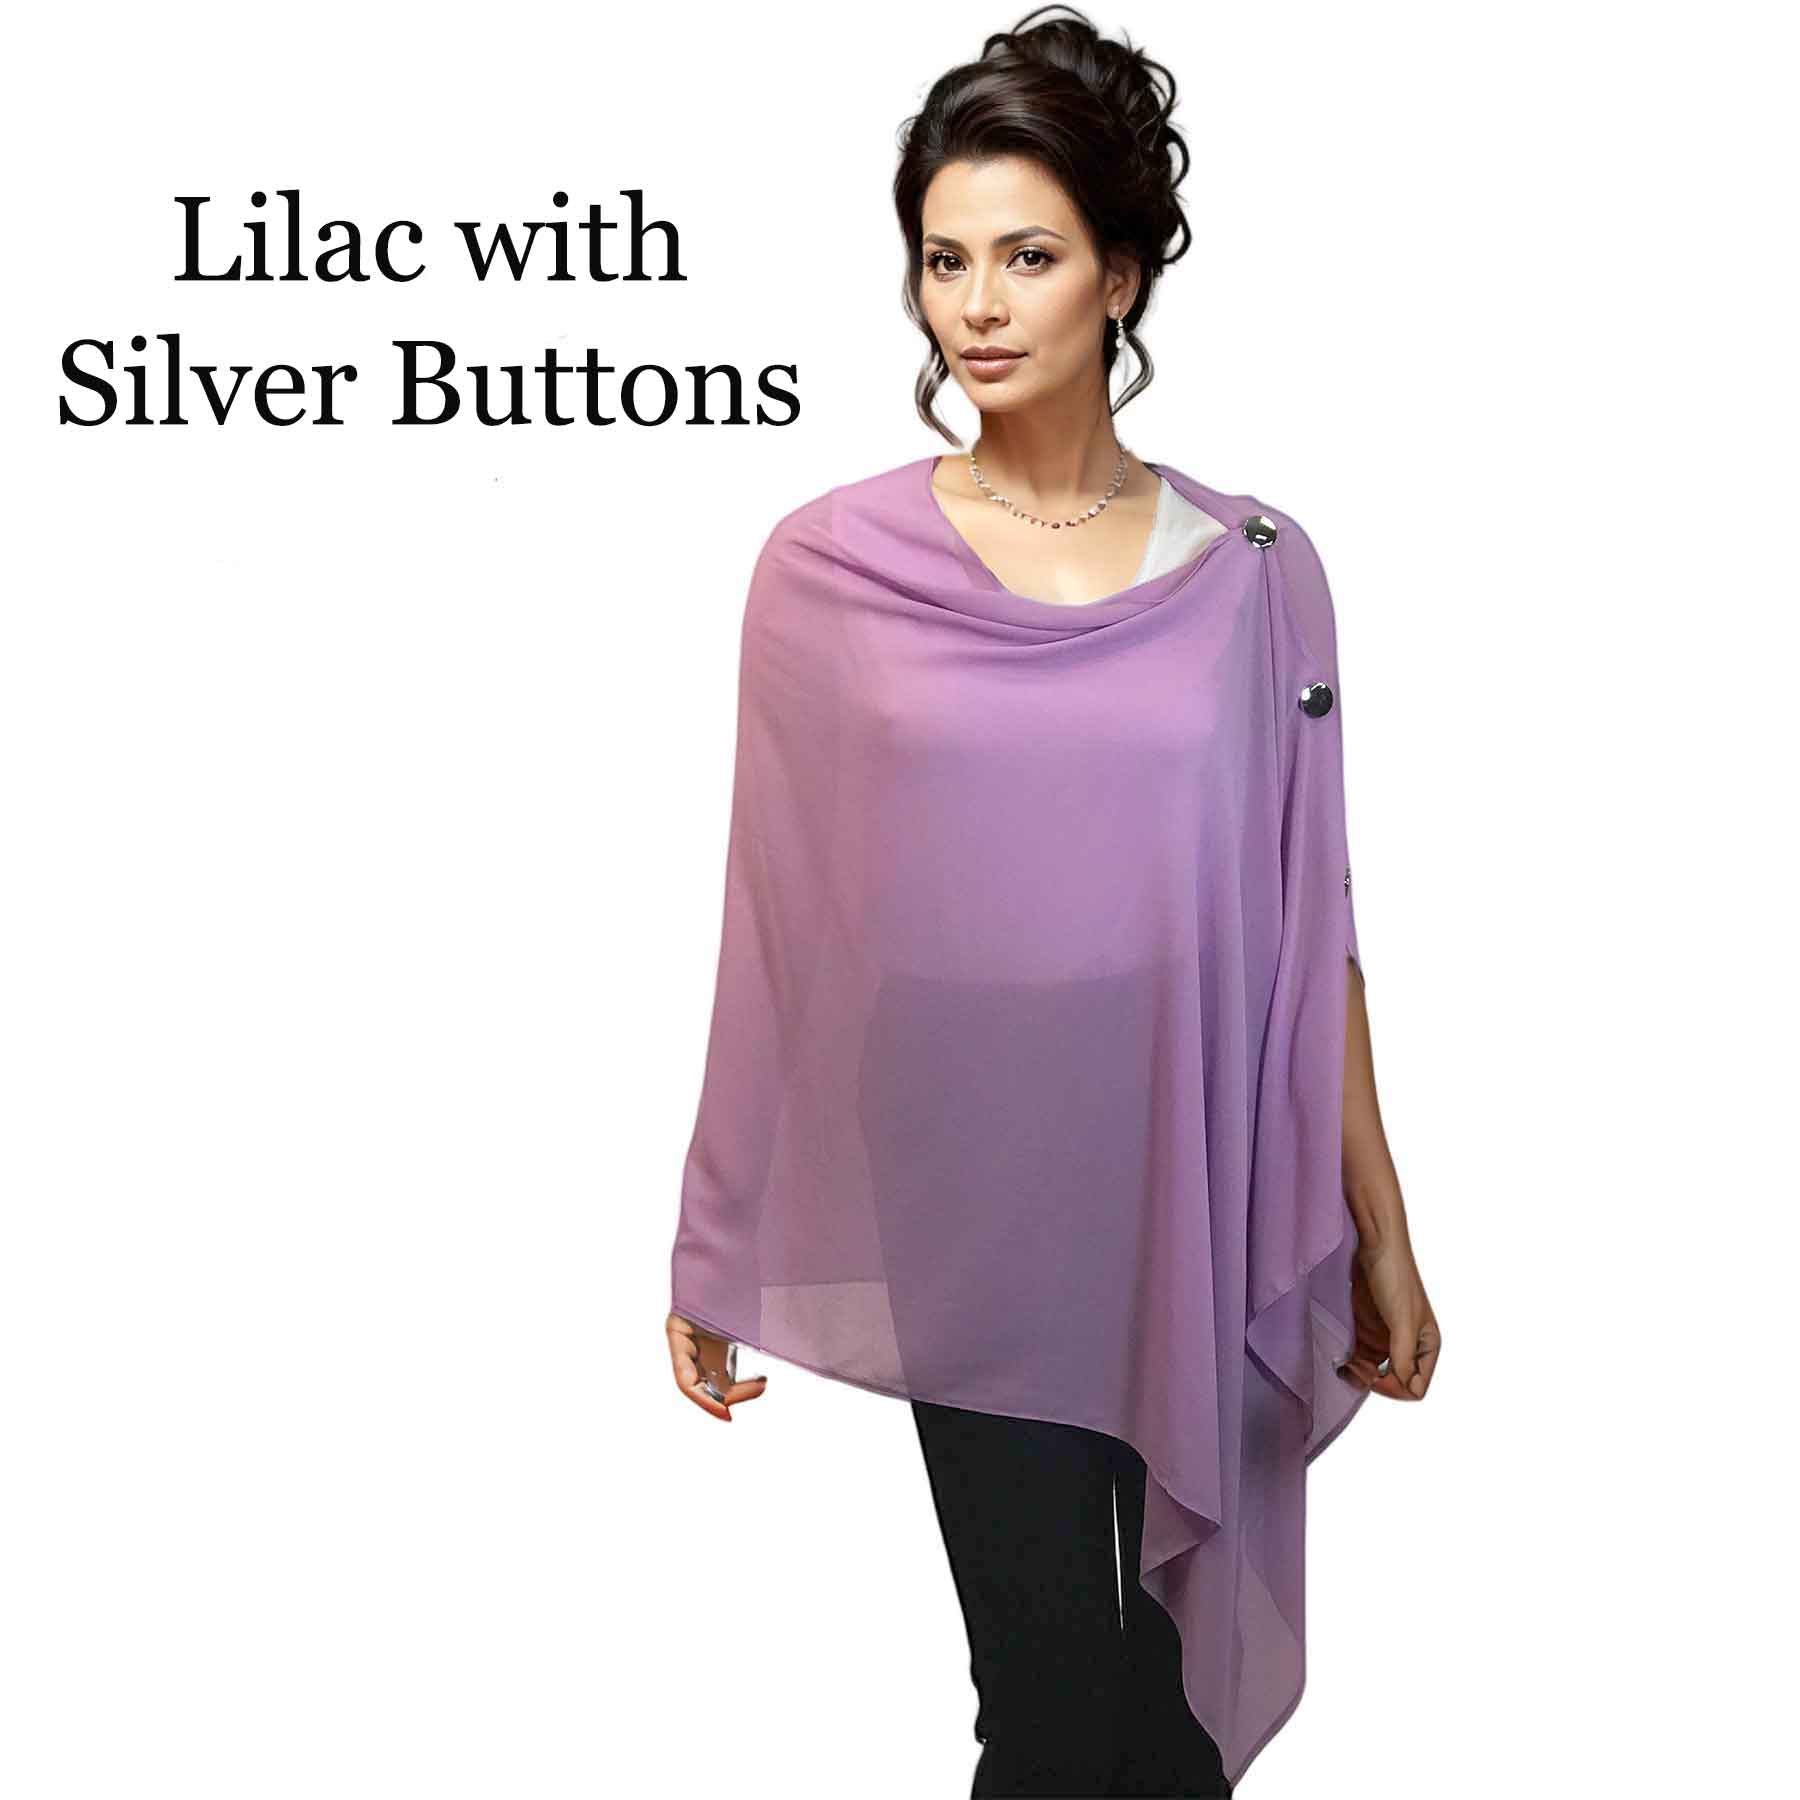 020S - Lilac w/Silver Buttons<br>
Georgette Button Shawl

